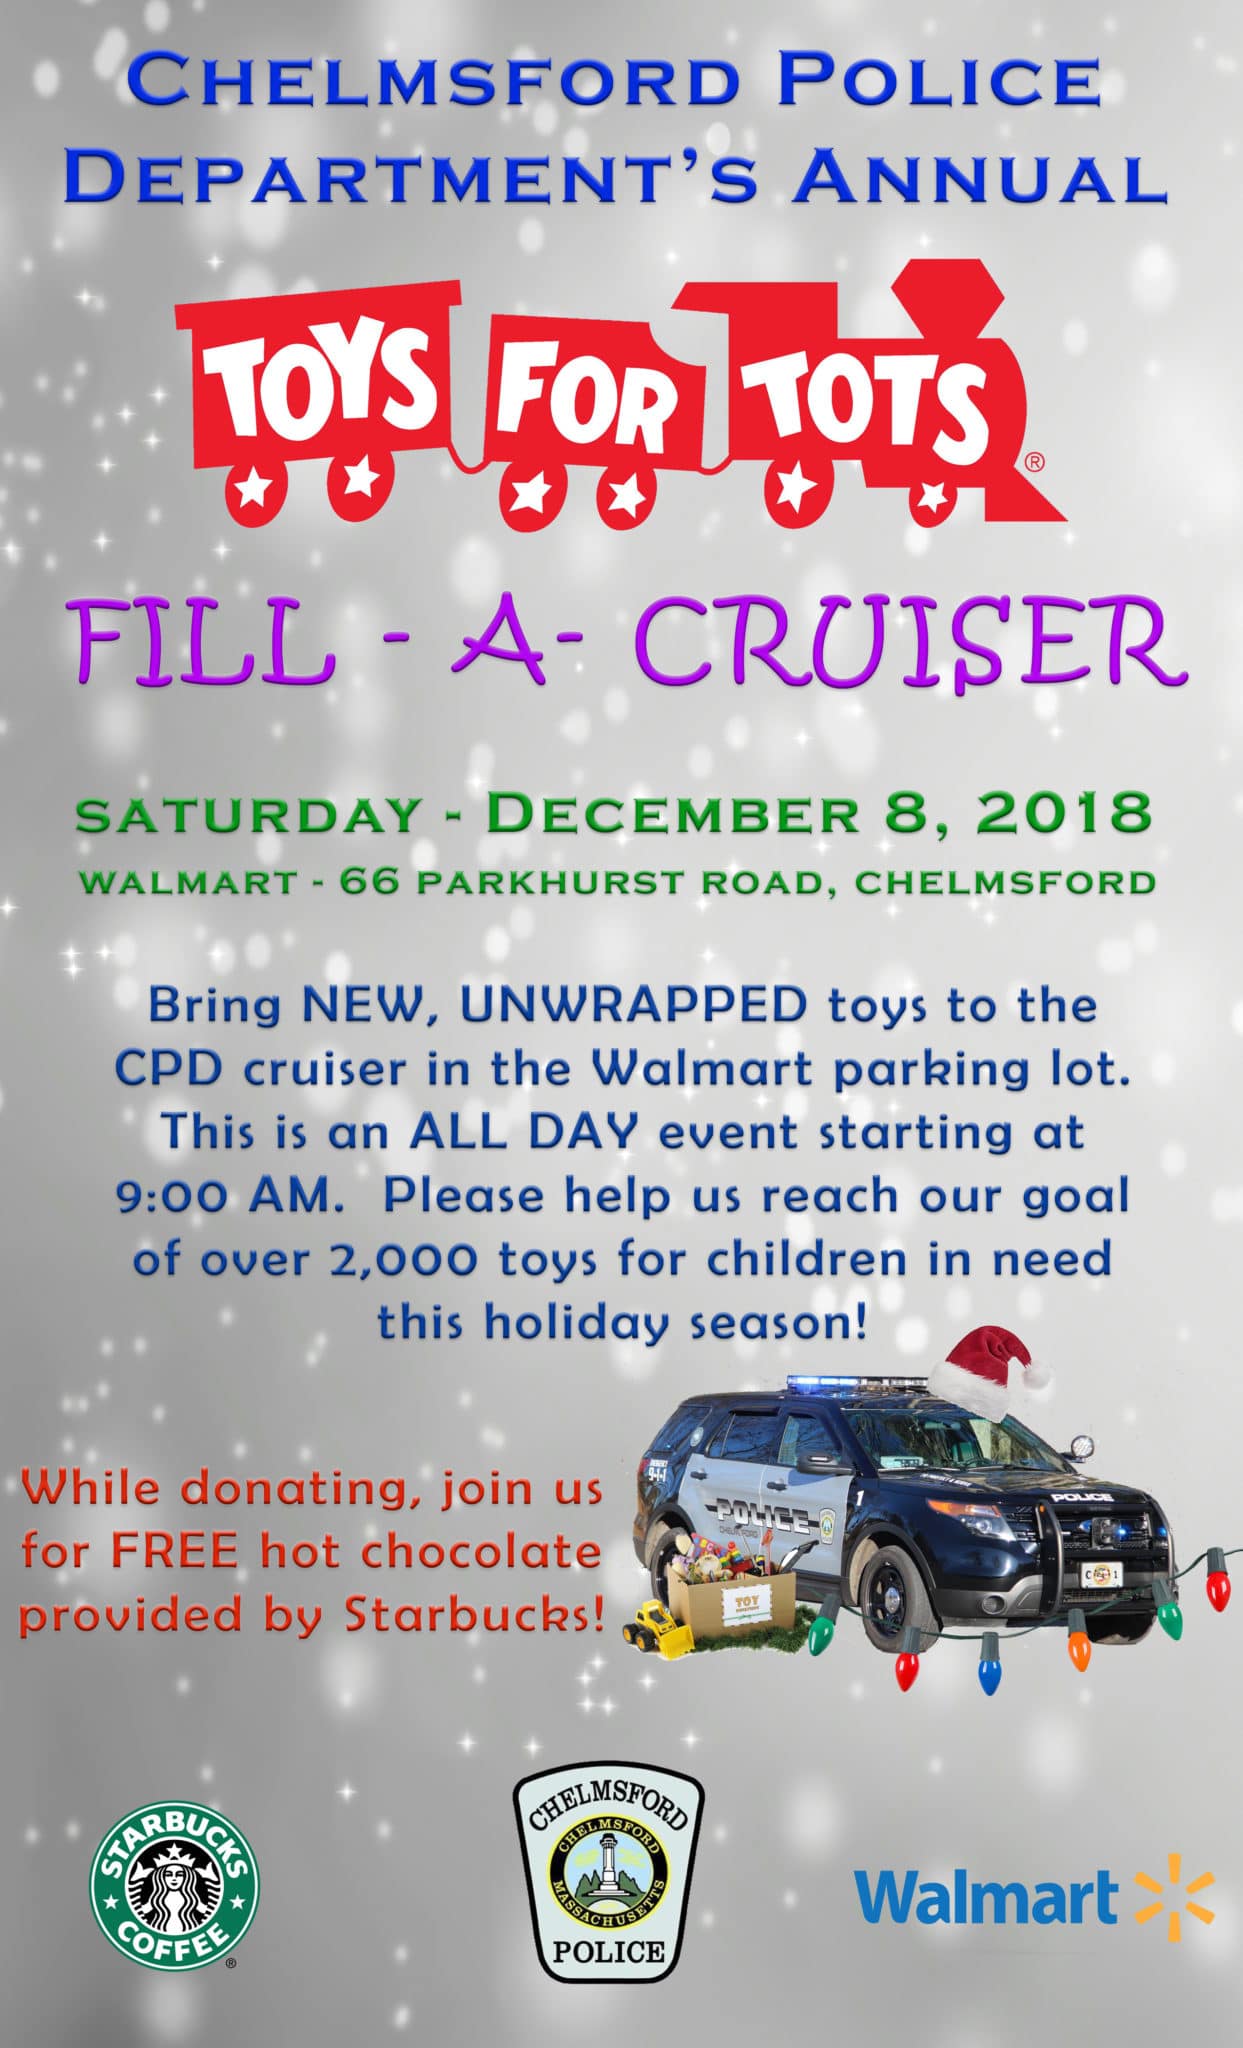 Chelmsford Police to Continue Tradition of Hosting Fill-A-Cruiser Event ...